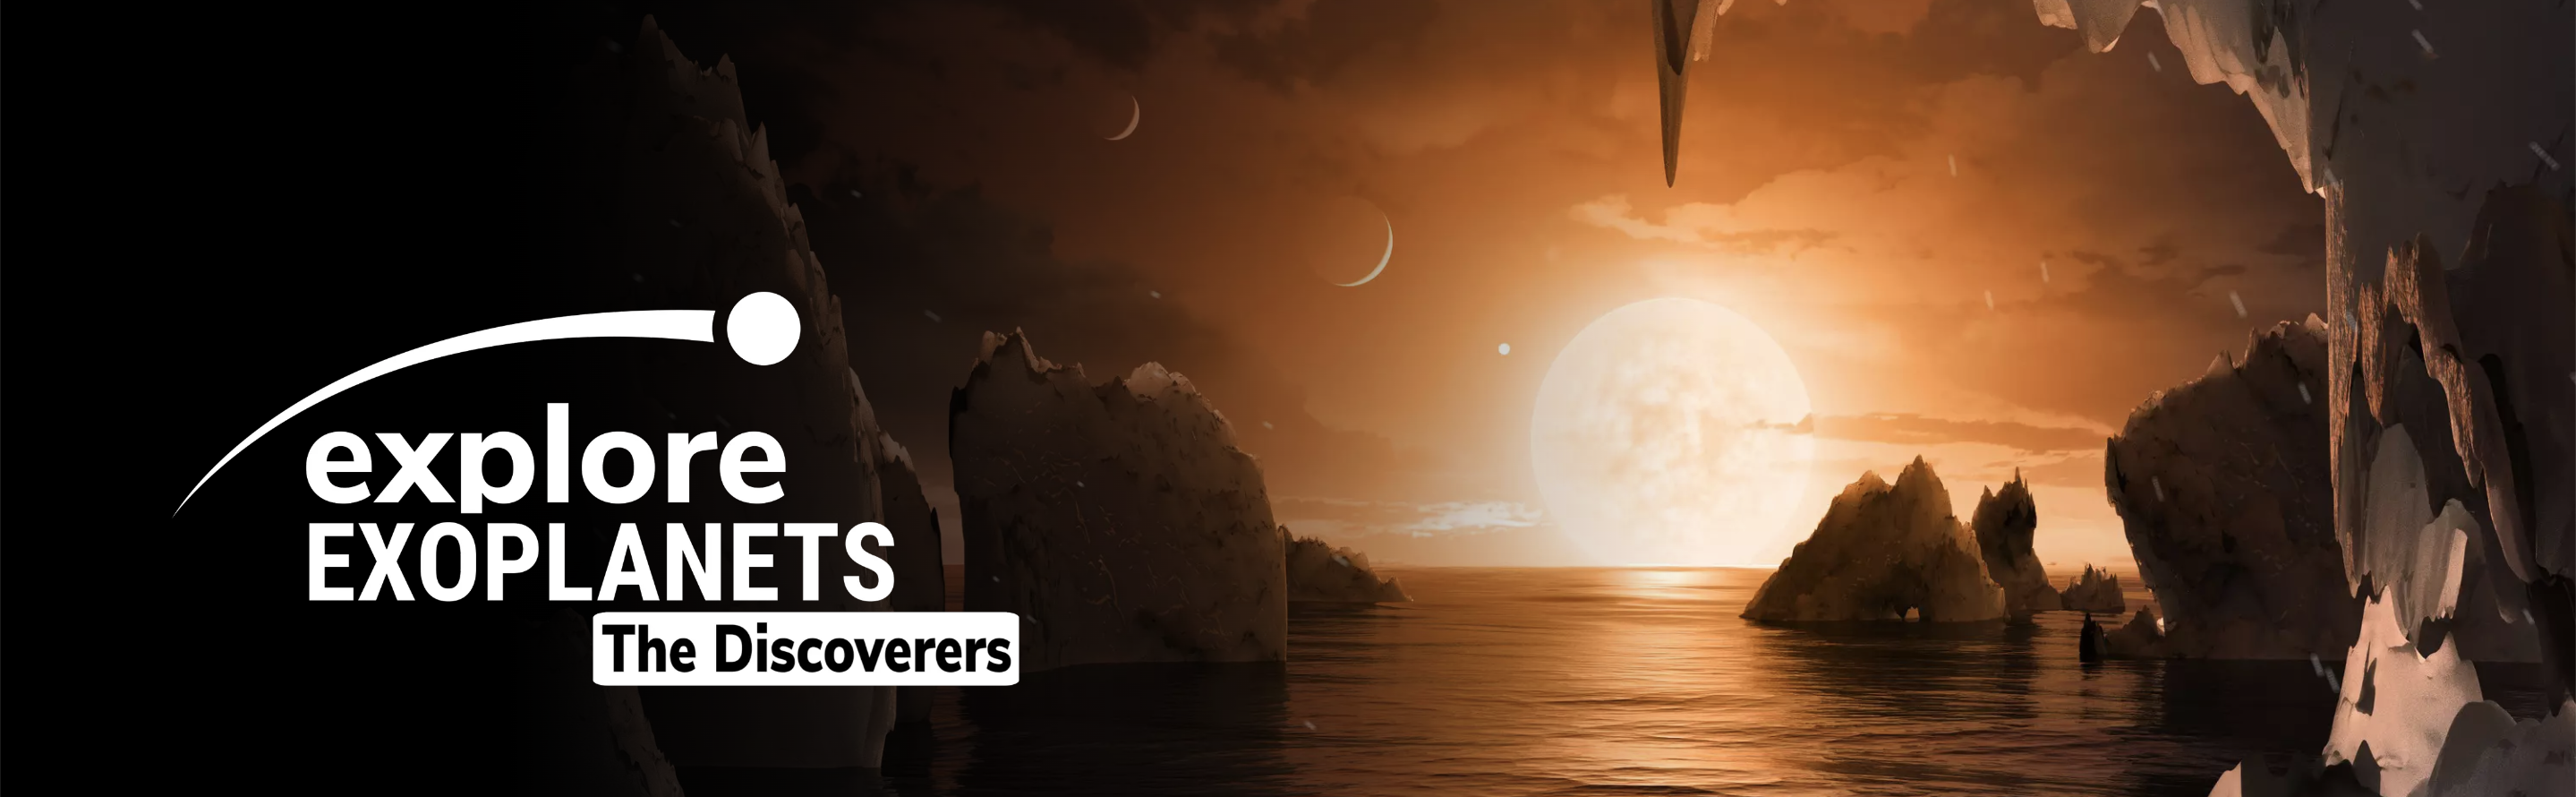 Explore Exoplanets: The Discoverers